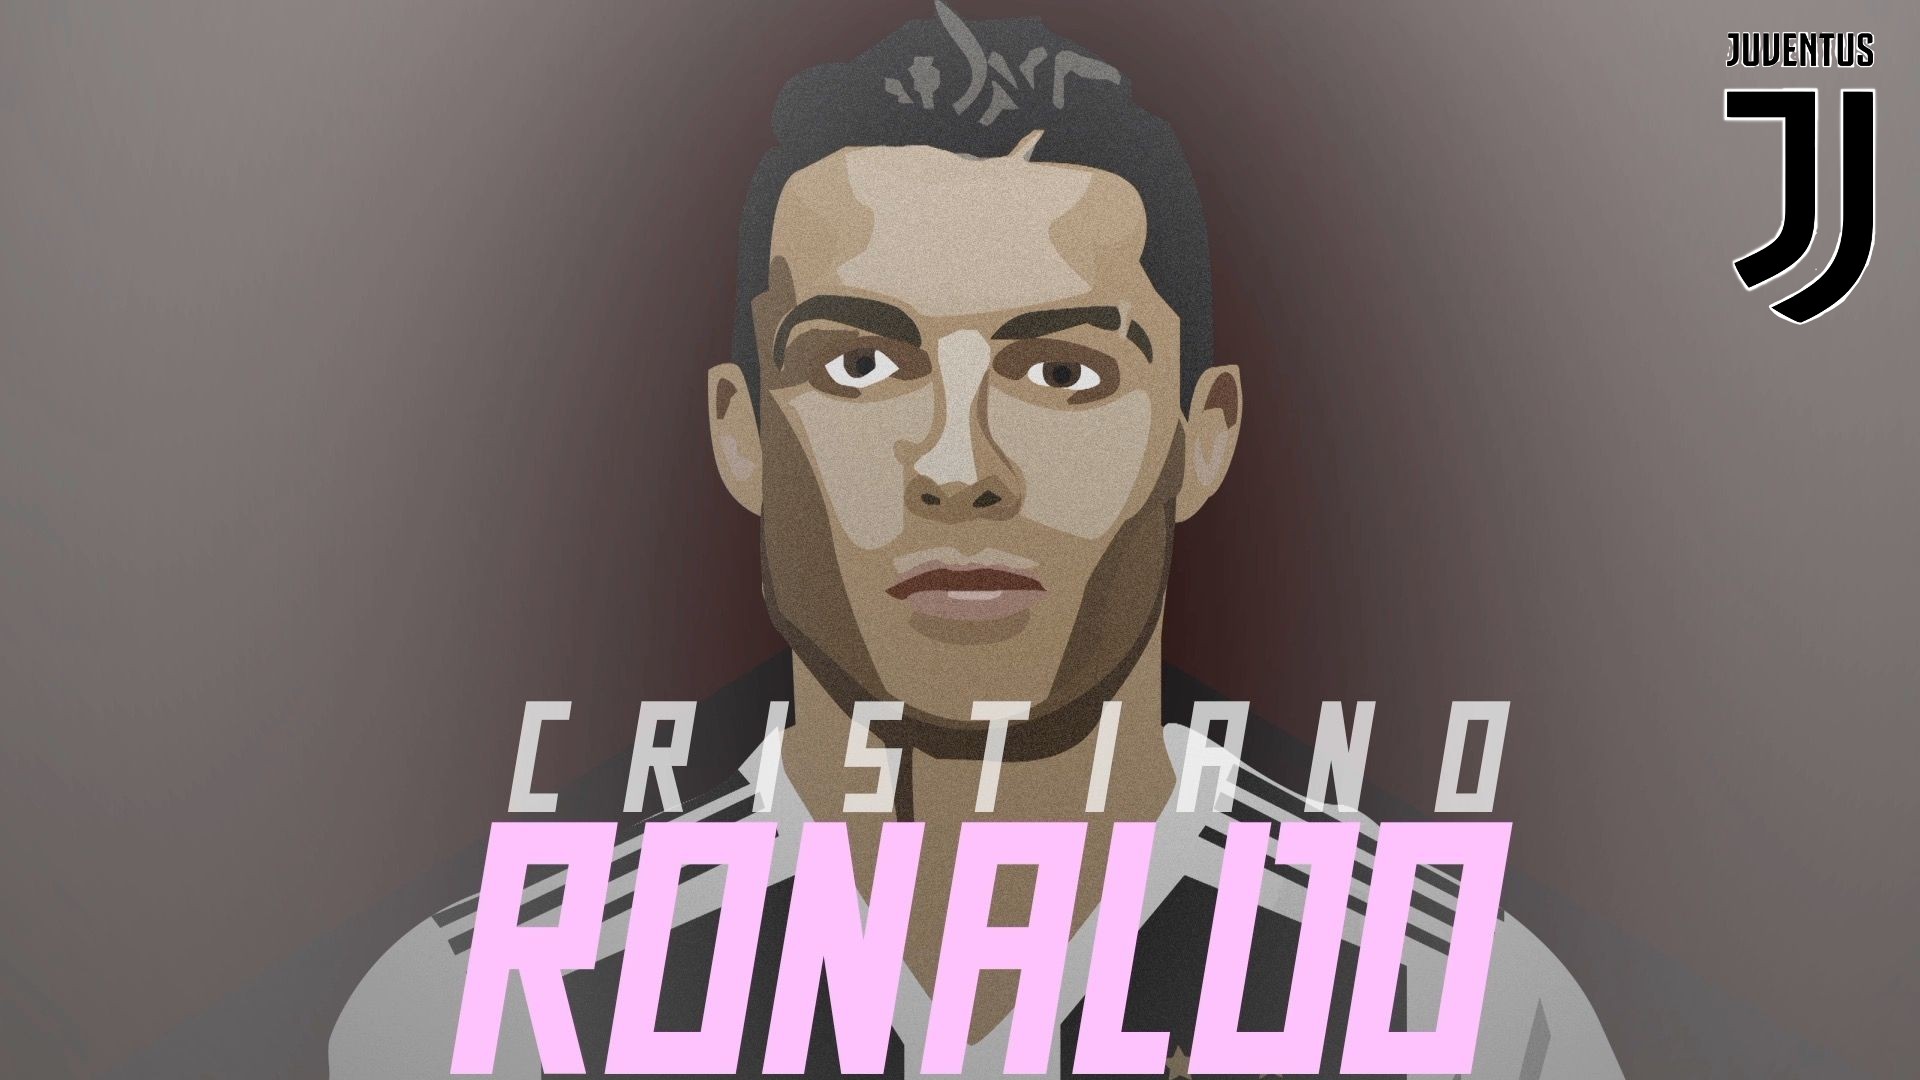 Cristiano Ronaldo Juve HD Wallpapers with resolution 1920x1080 pixel. You can make this wallpaper for your Mac or Windows Desktop Background, iPhone, Android or Tablet and another Smartphone device